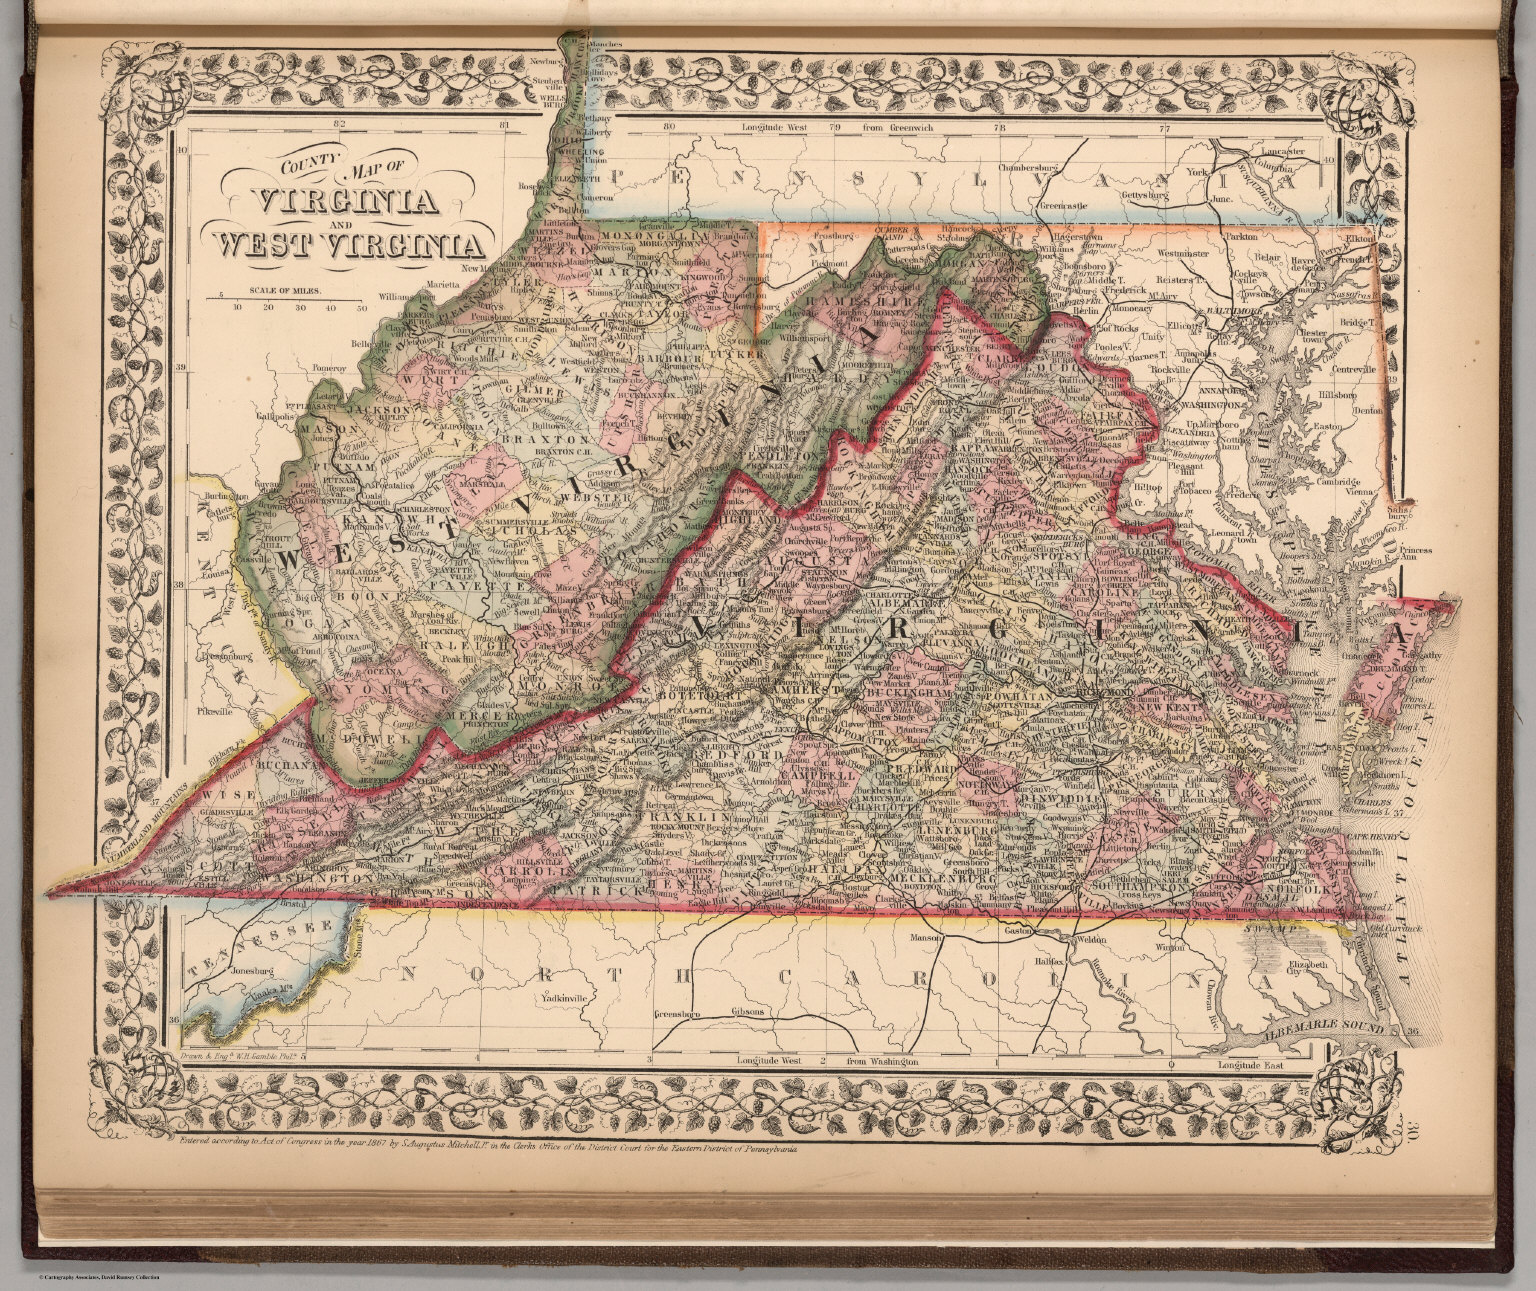 County Map Of Virginia And West Virginia David Rumsey Historical Map Collection 5413